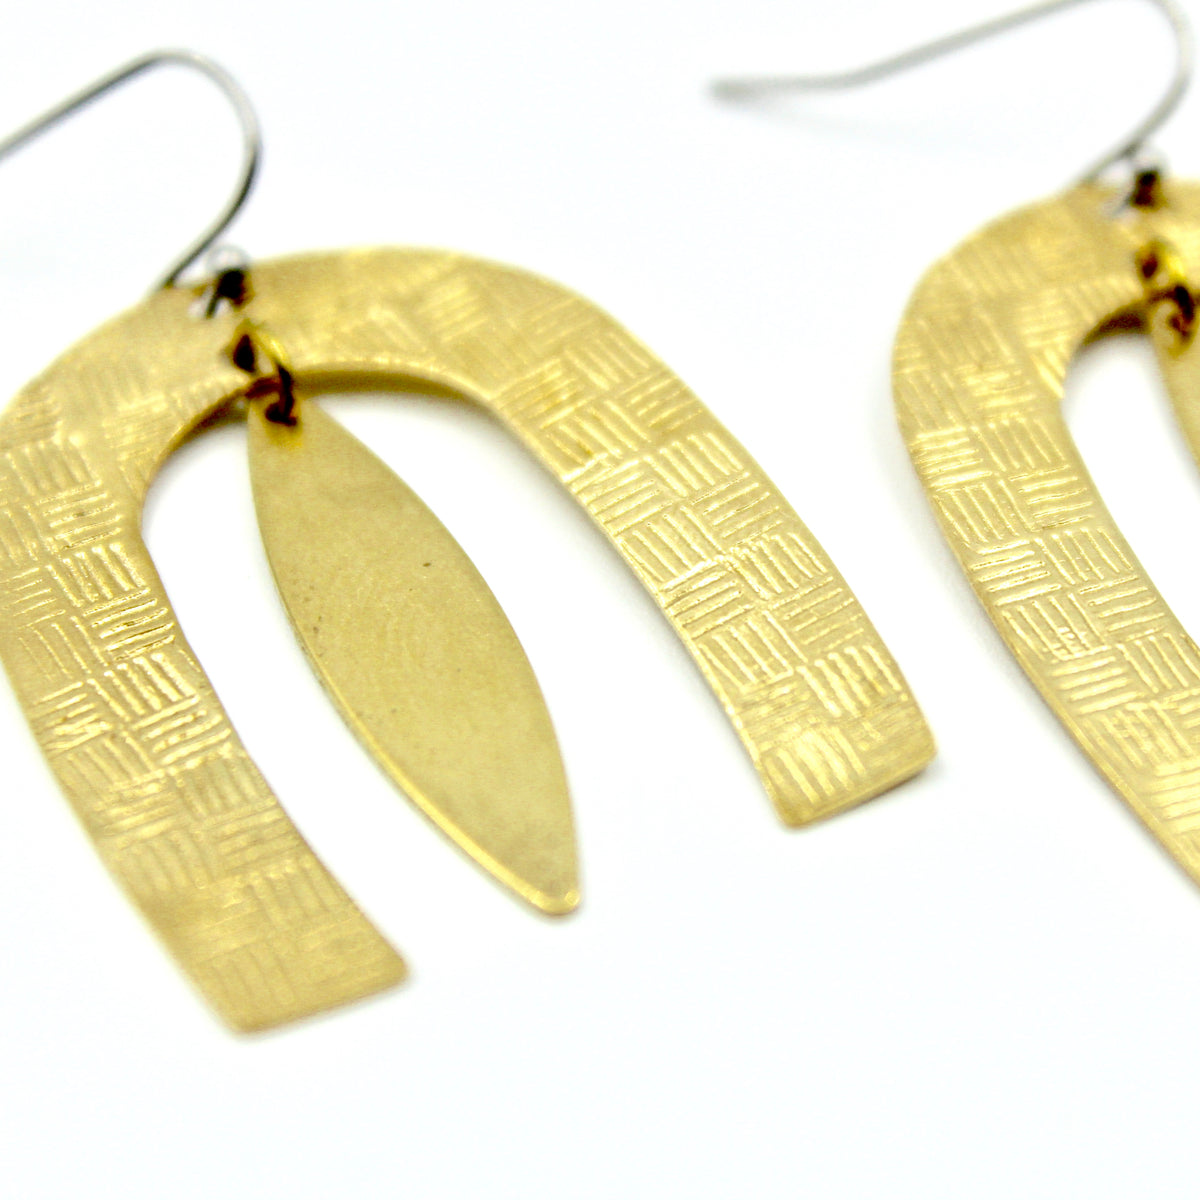 Weave Arches Earrings